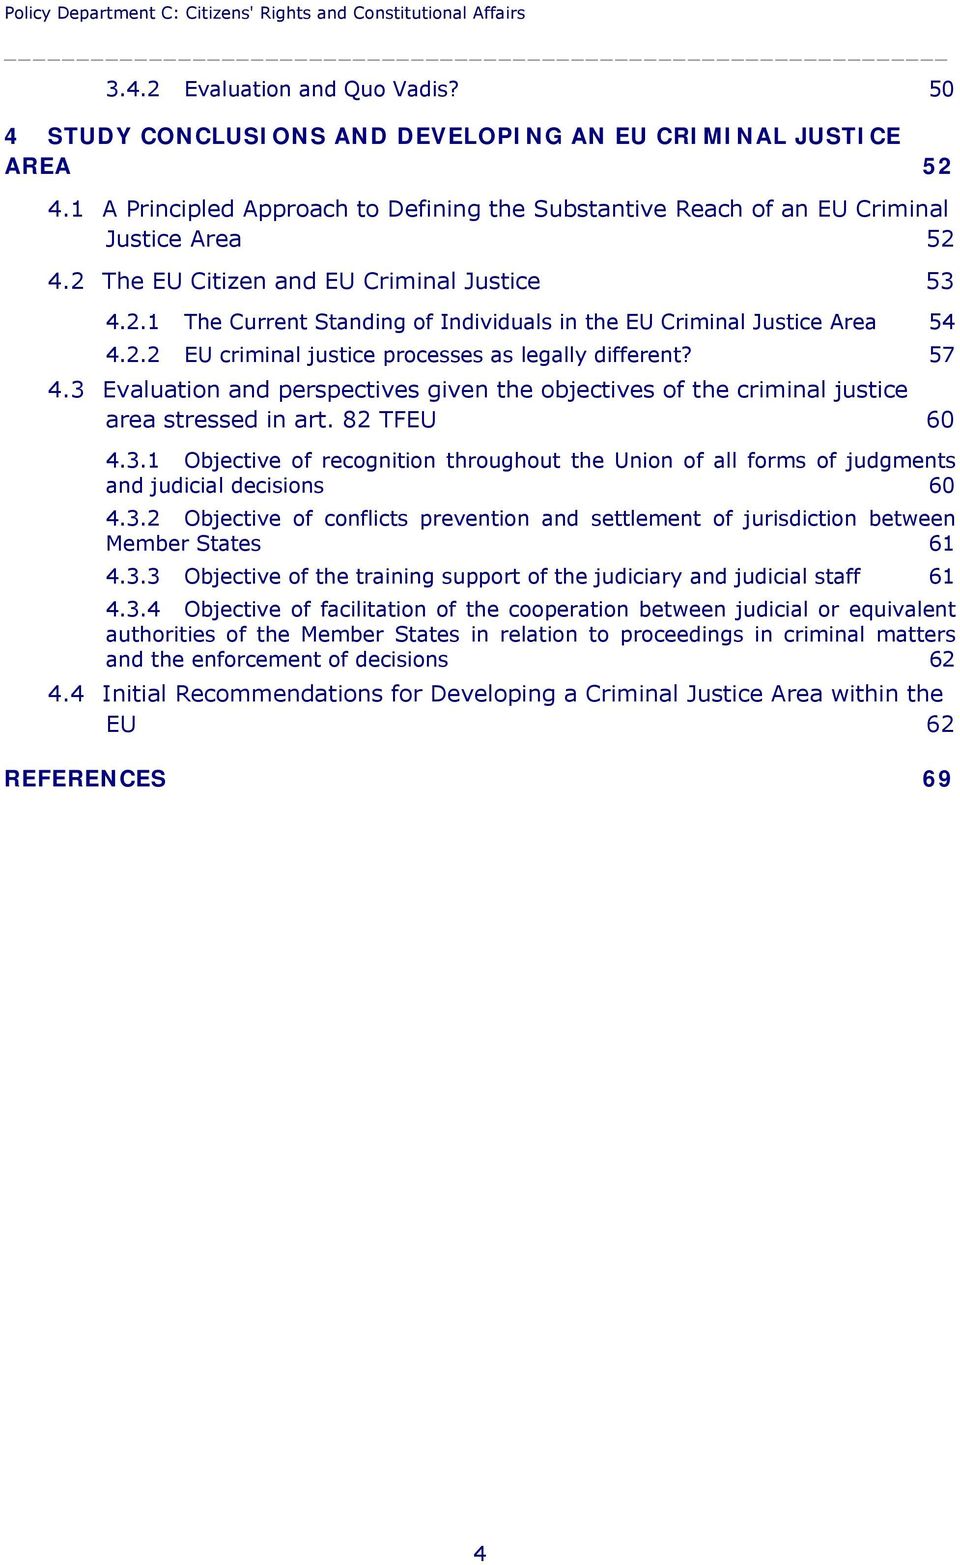 2.2 EU criminal justice processes as legally different? 57 4.3 Evaluation and perspectives given the objectives of the criminal justice area stressed in art. 82 TFEU 4.3.1 Objective of recognition throughout the Union of all forms of judgments and judicial decisions 60 4.